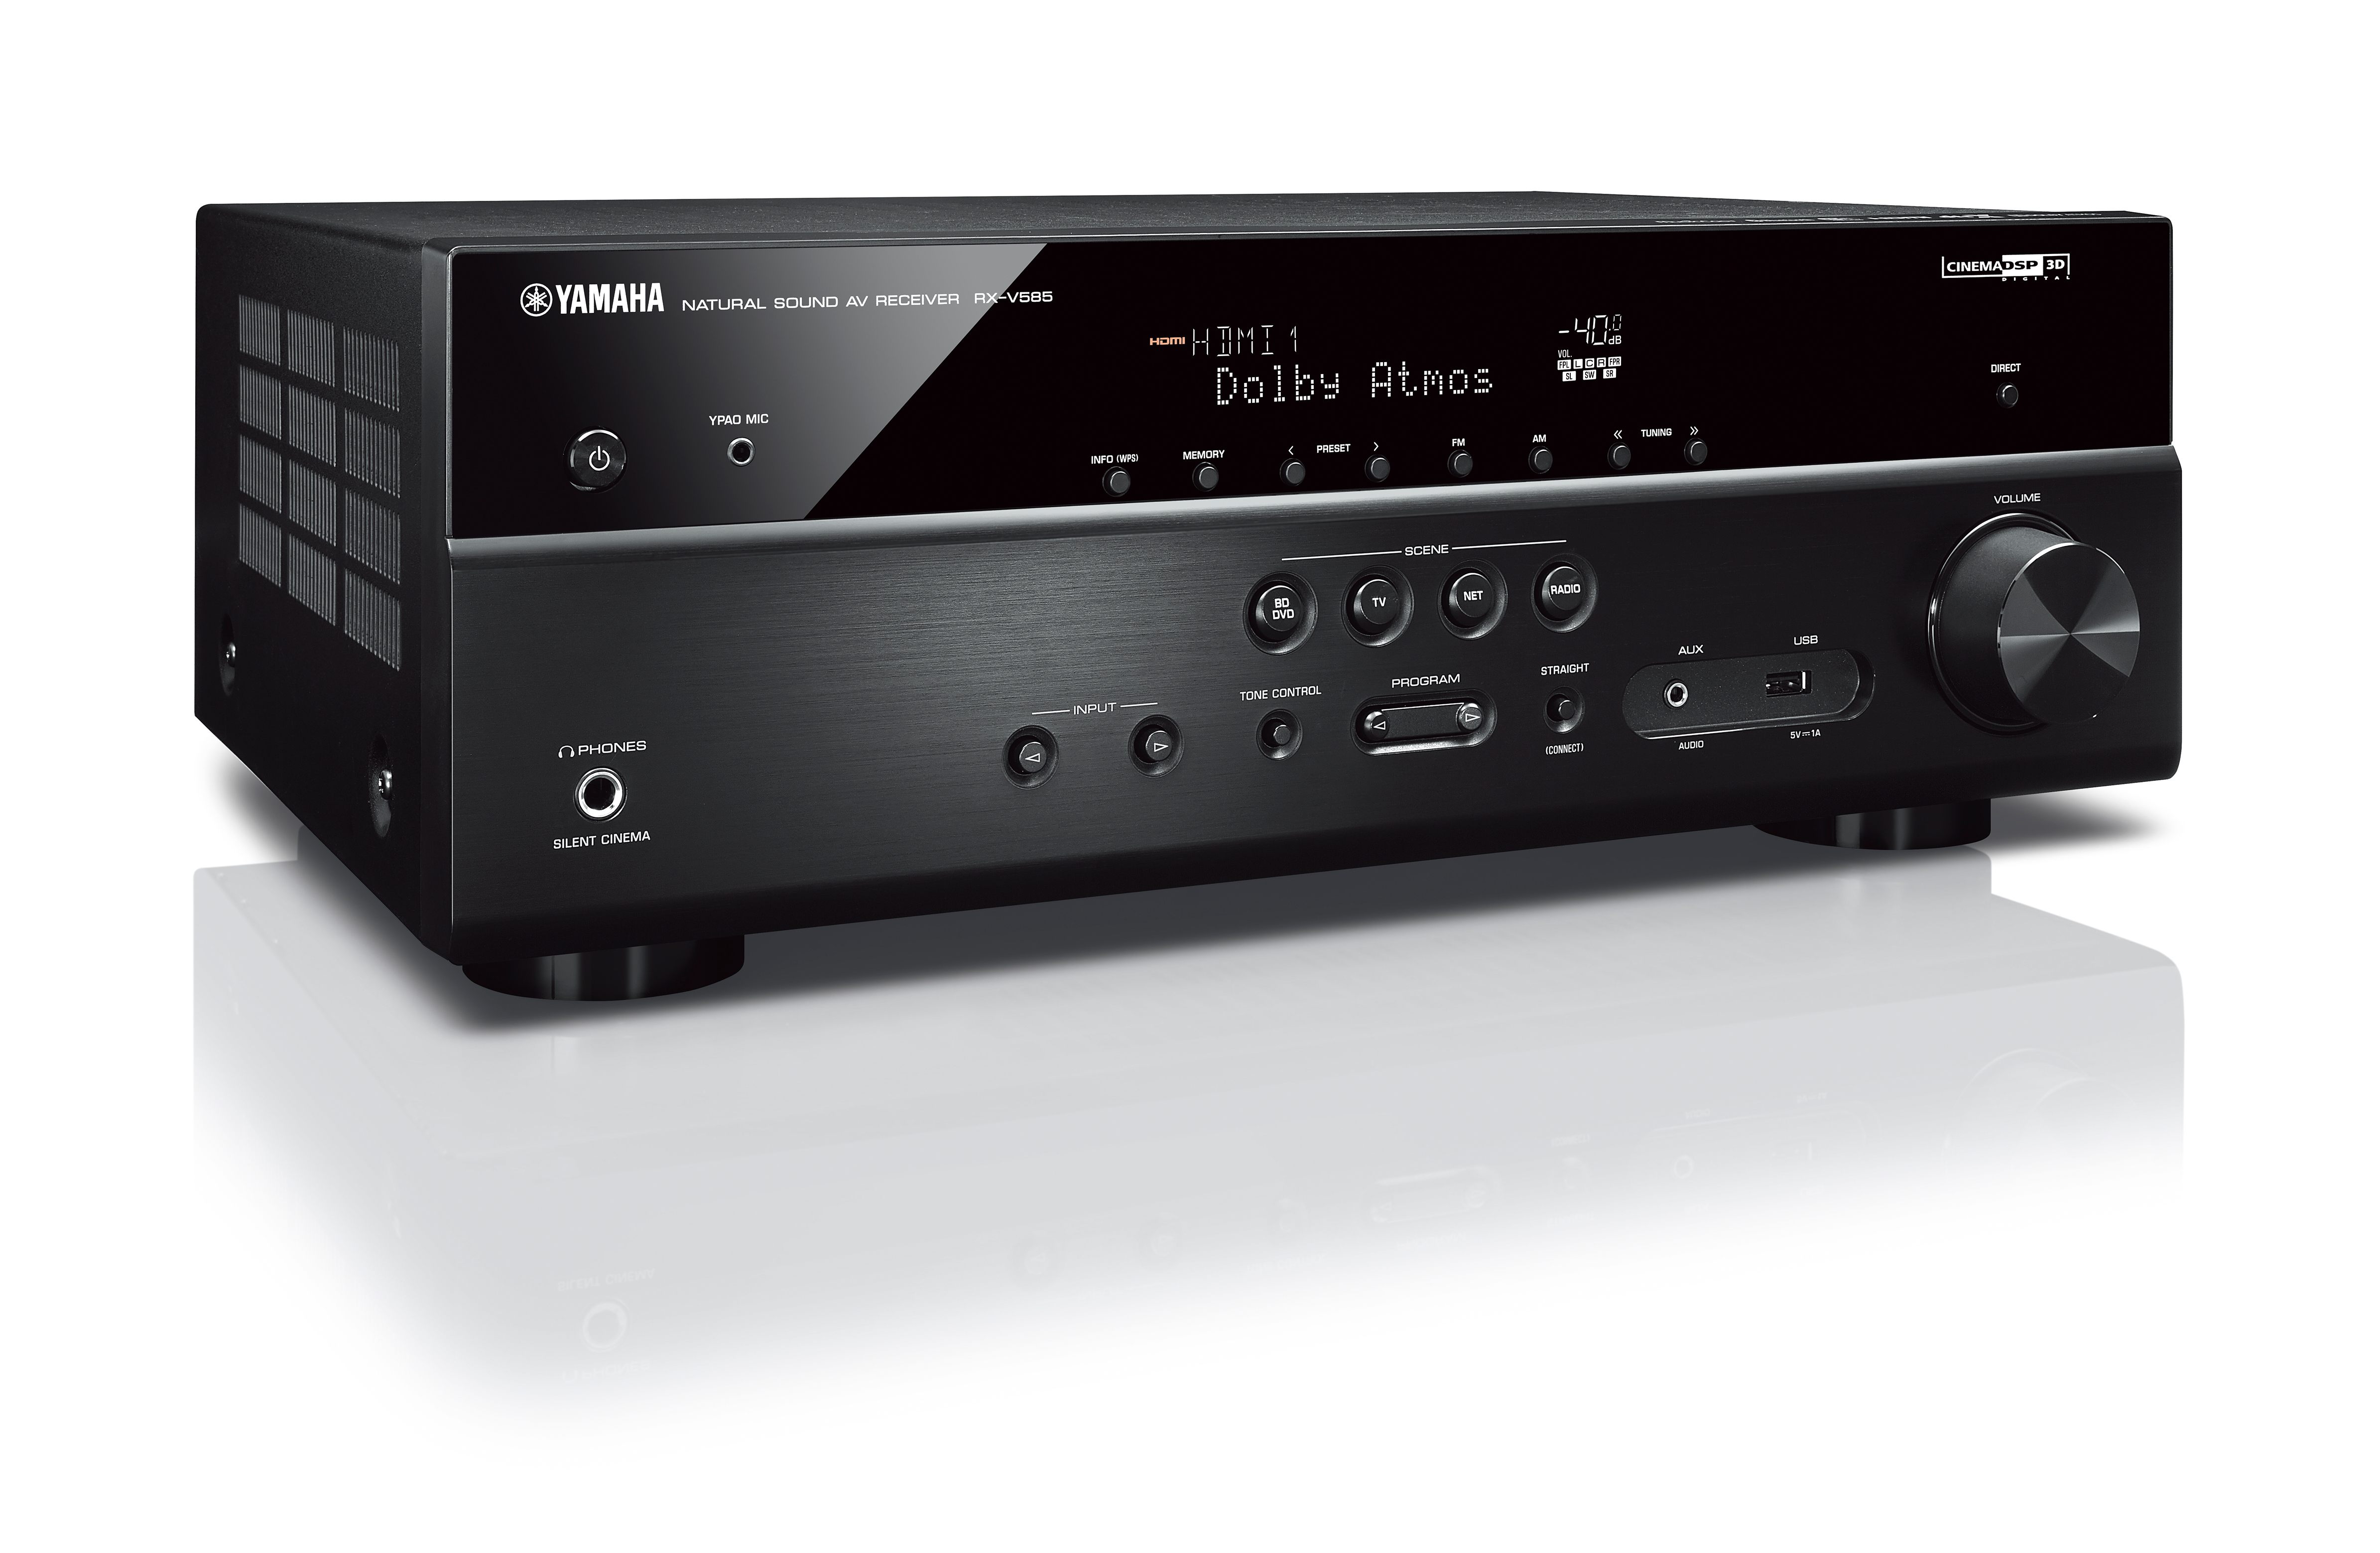 RX-V585 - Overview - AV Receivers - Audio & Visual - Products